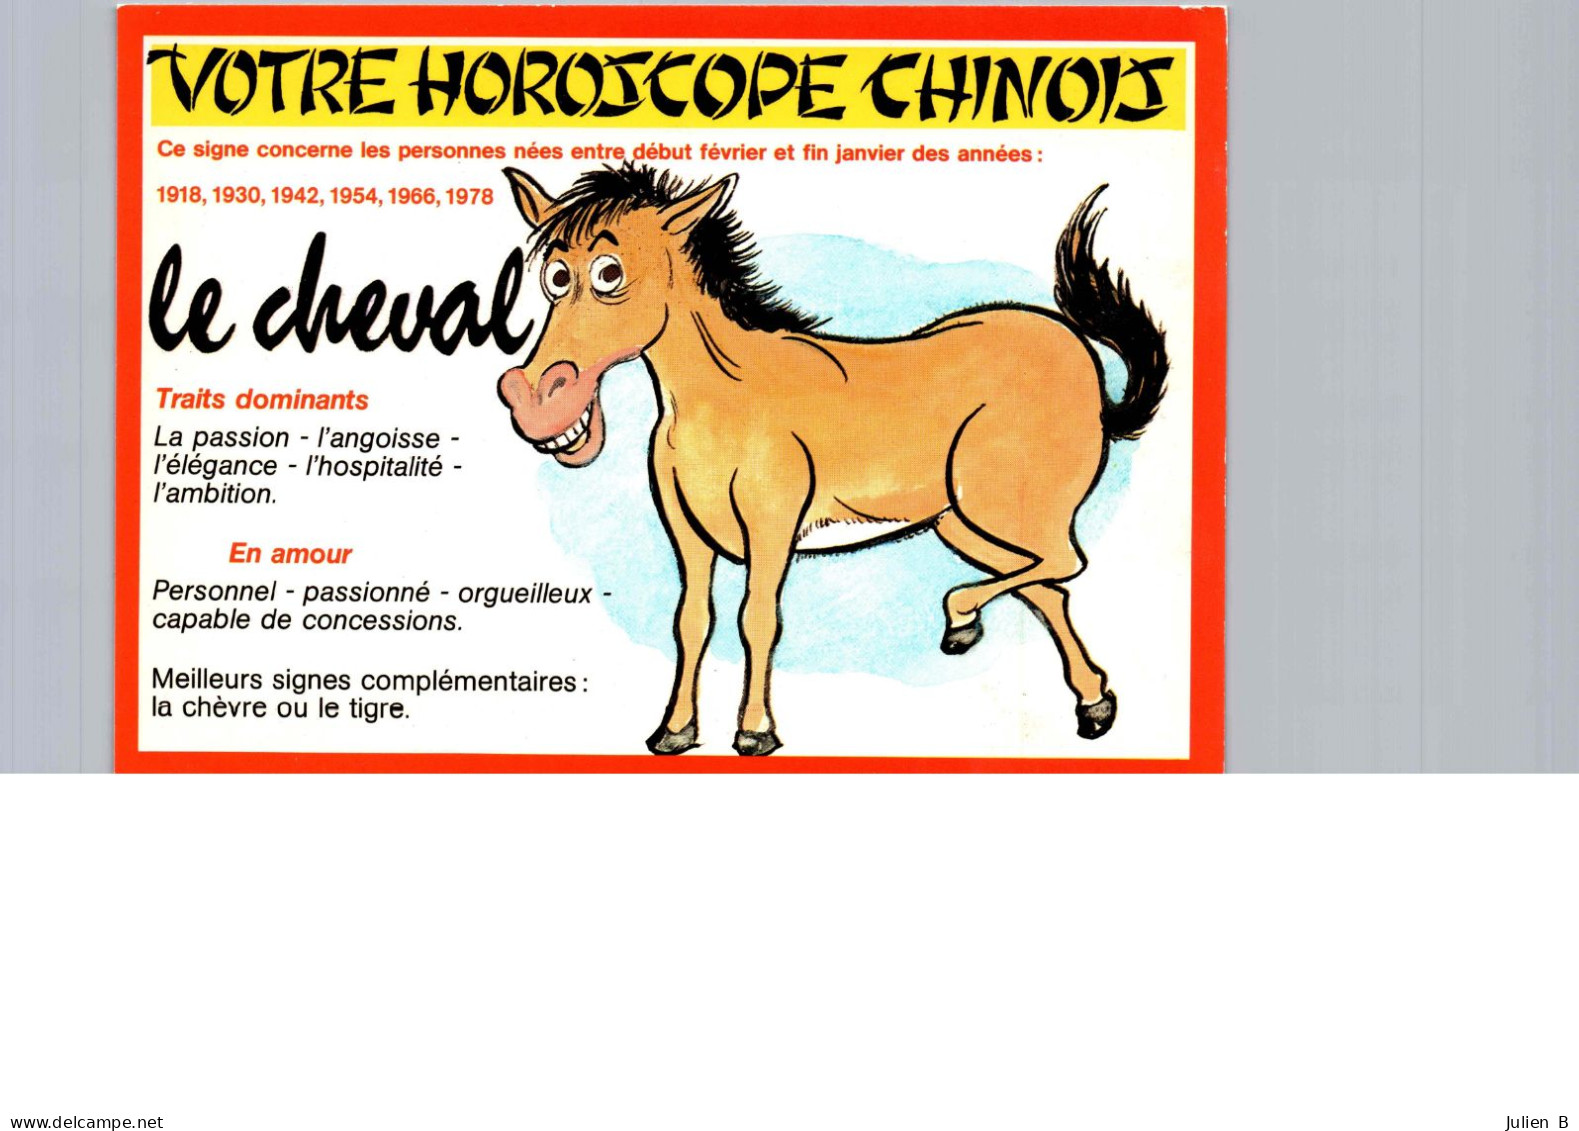 Le Cheval, Votre Horoscope Chinois, Edition Lyna-Paris - Astrology